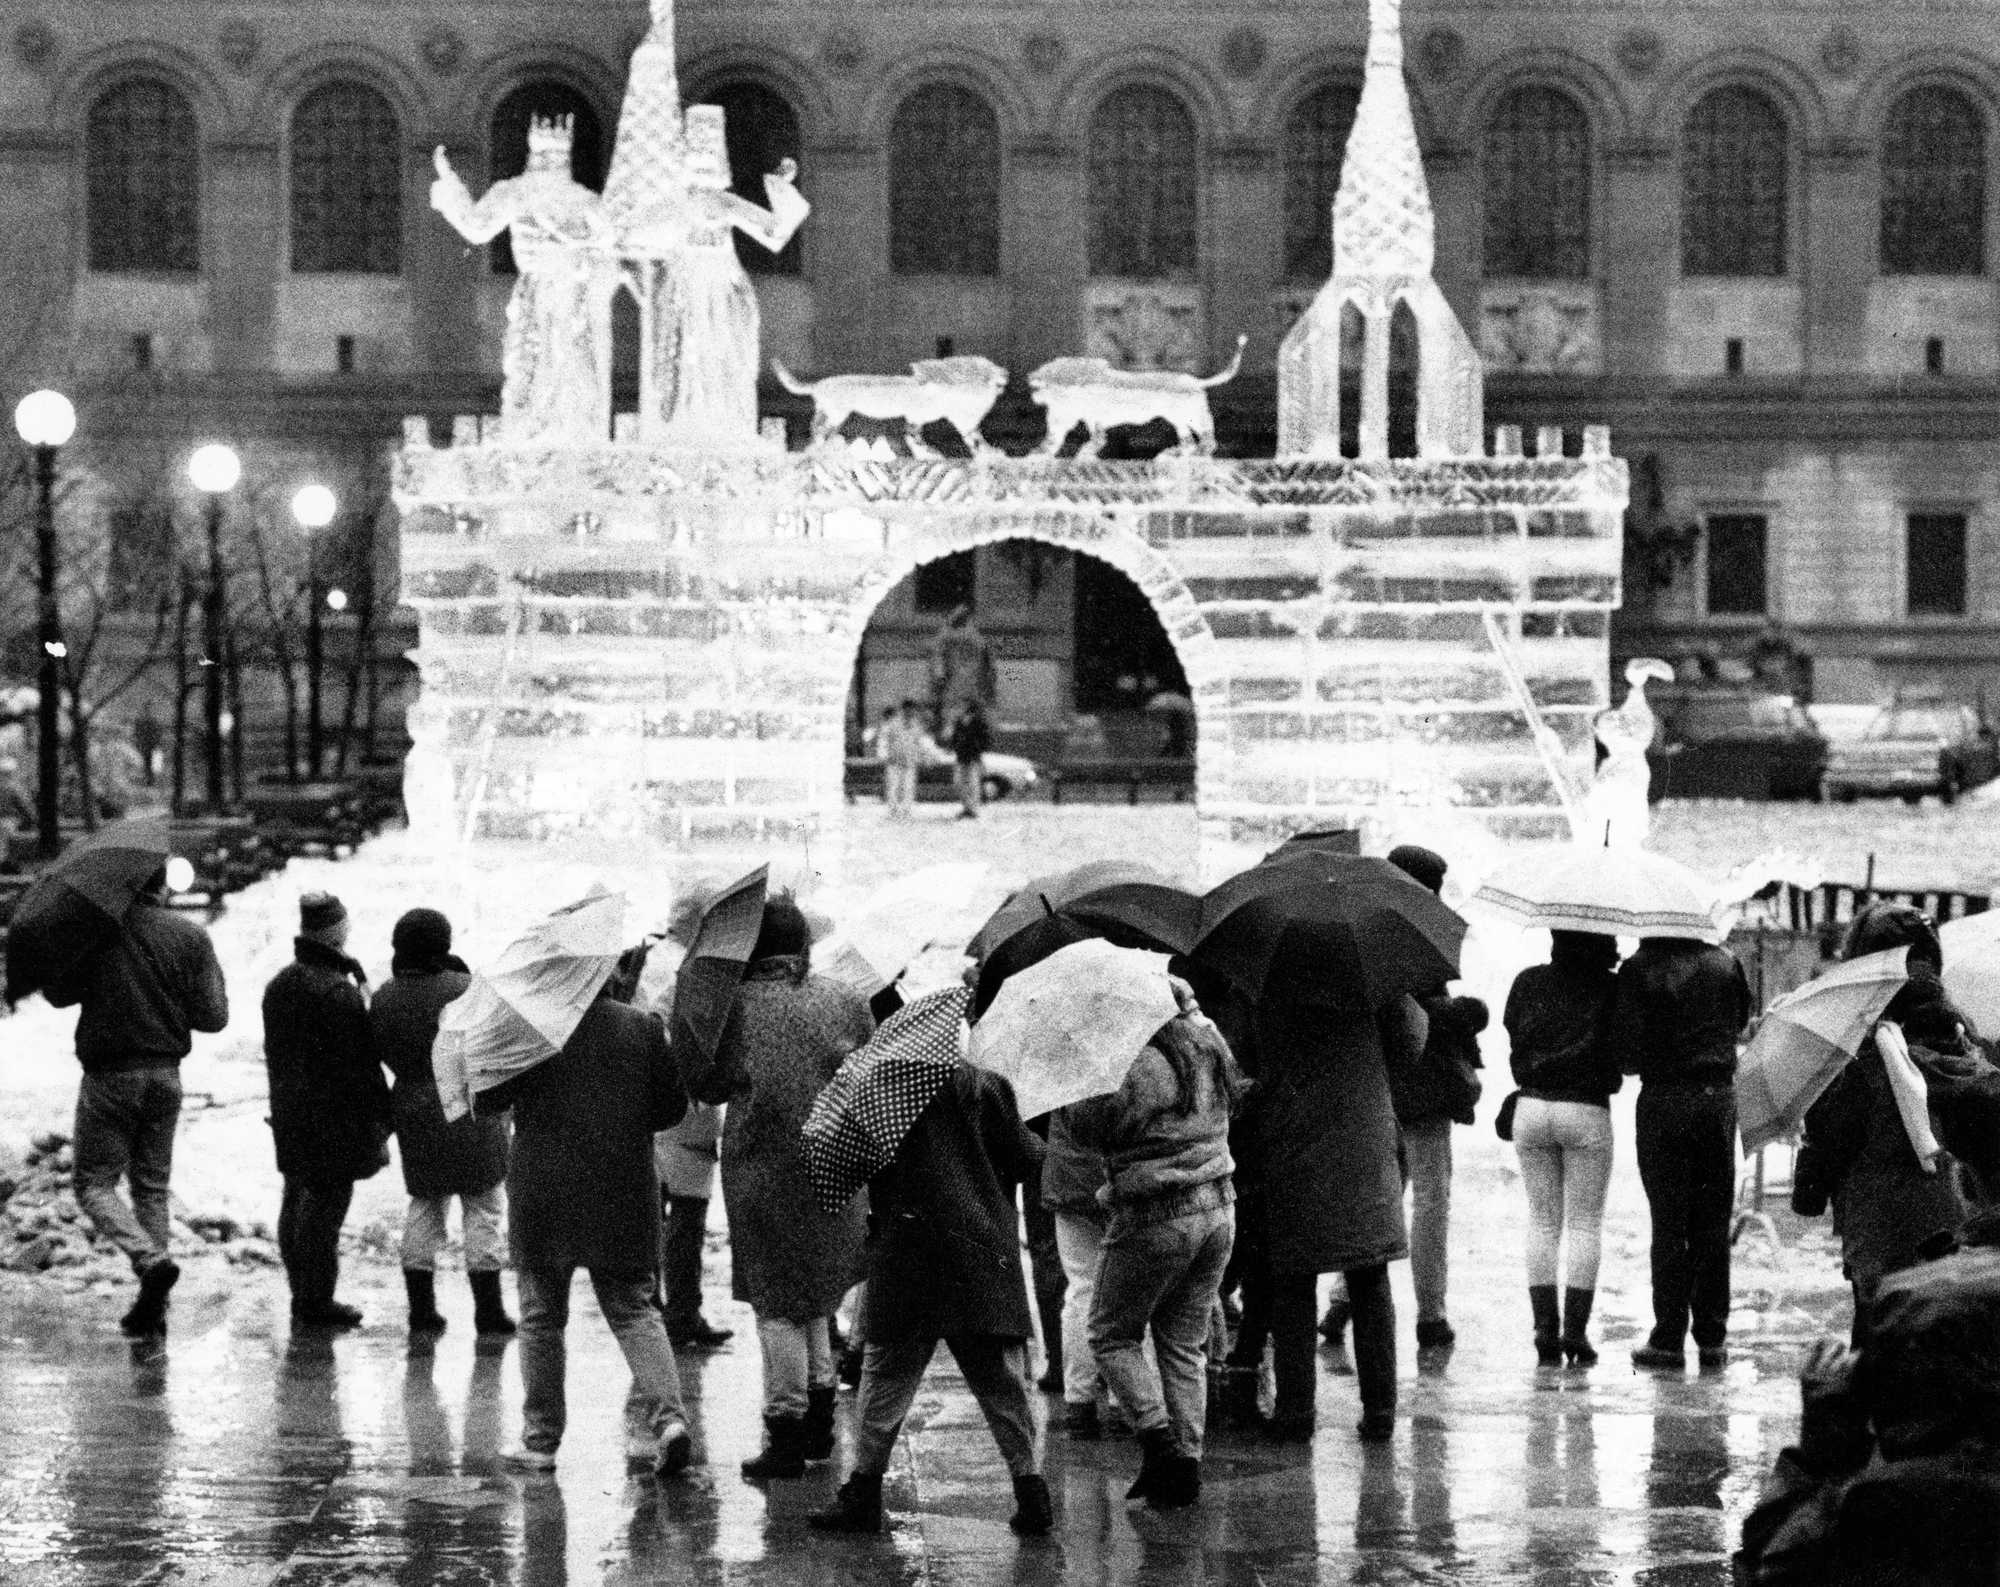 Rain-soaked attendees admired an ice sculpture at Copley Square during First Night festivities in Boston on Dec. 31, 1989. 